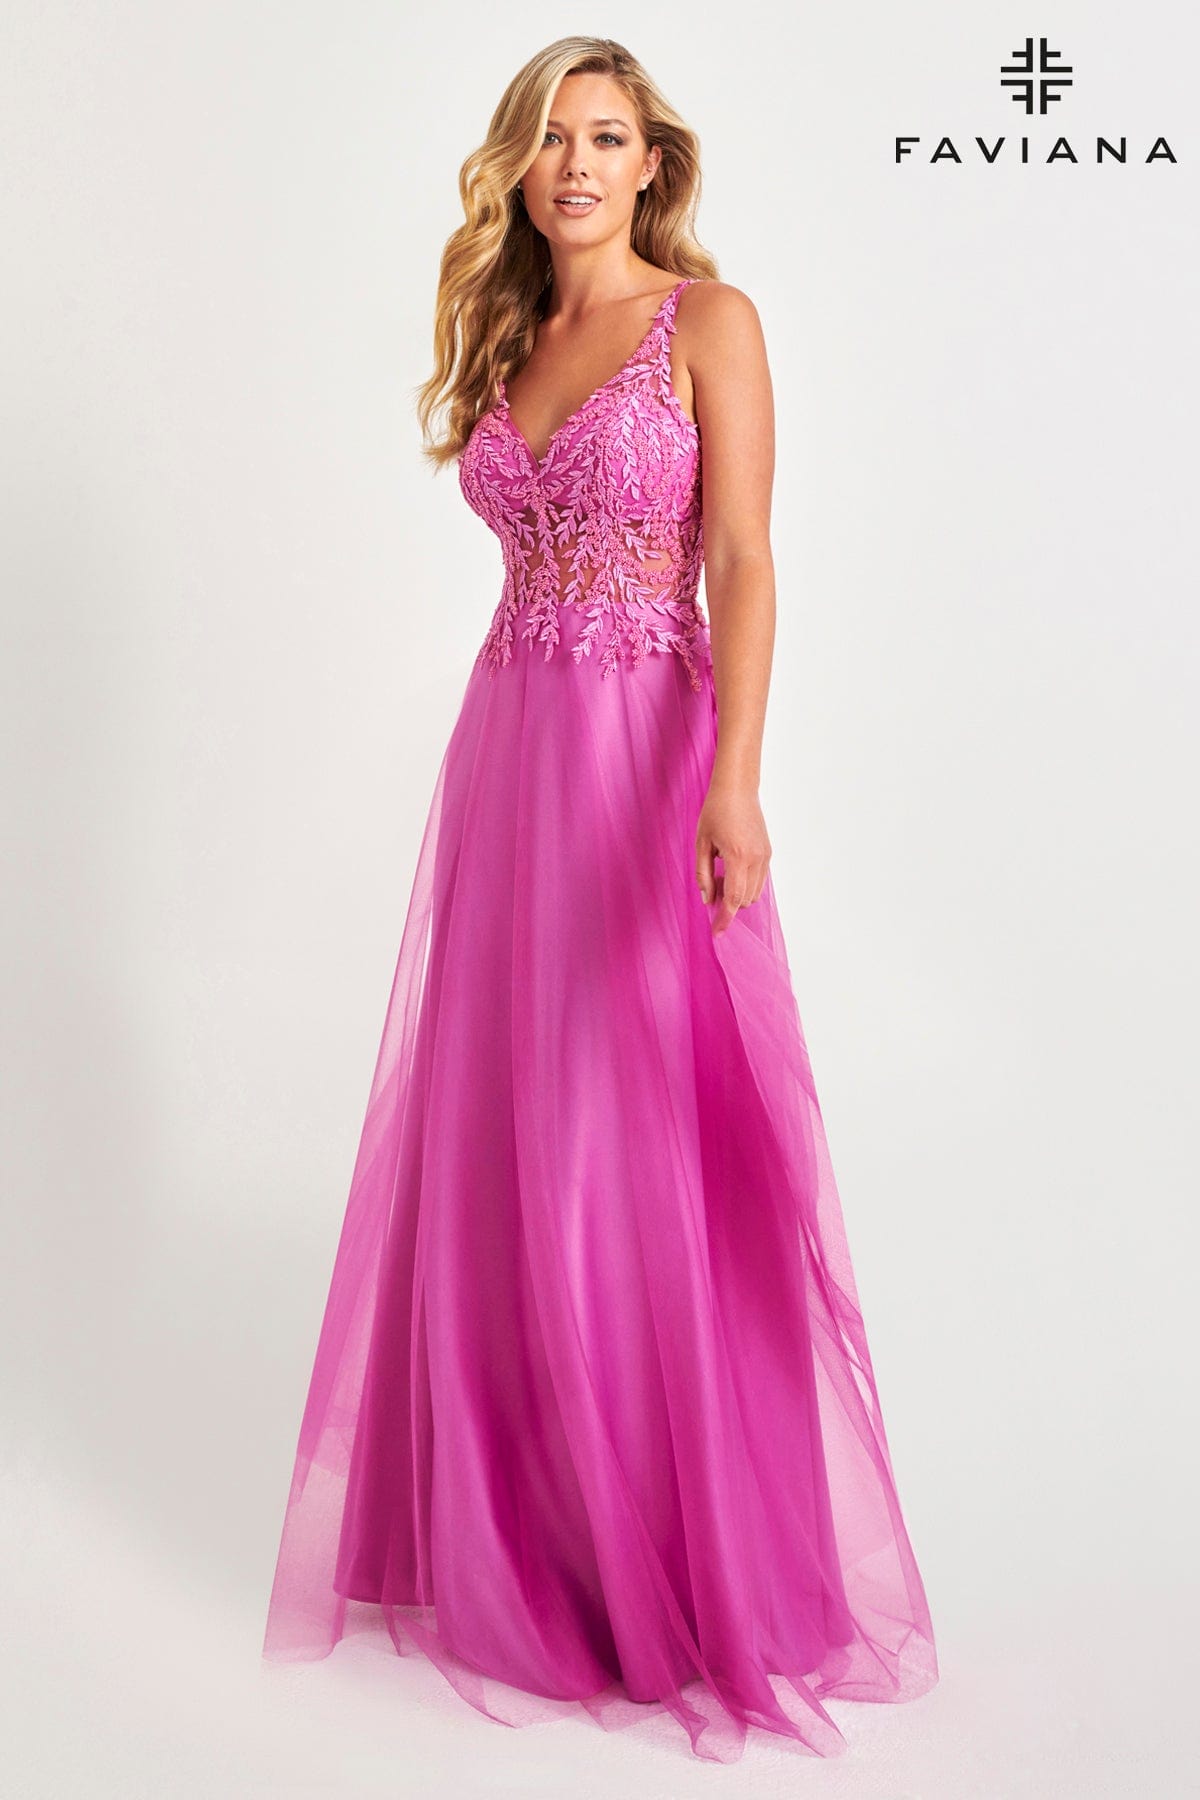 Flowy Tulle Prom Dress With Lace Applique Bustier | 11055